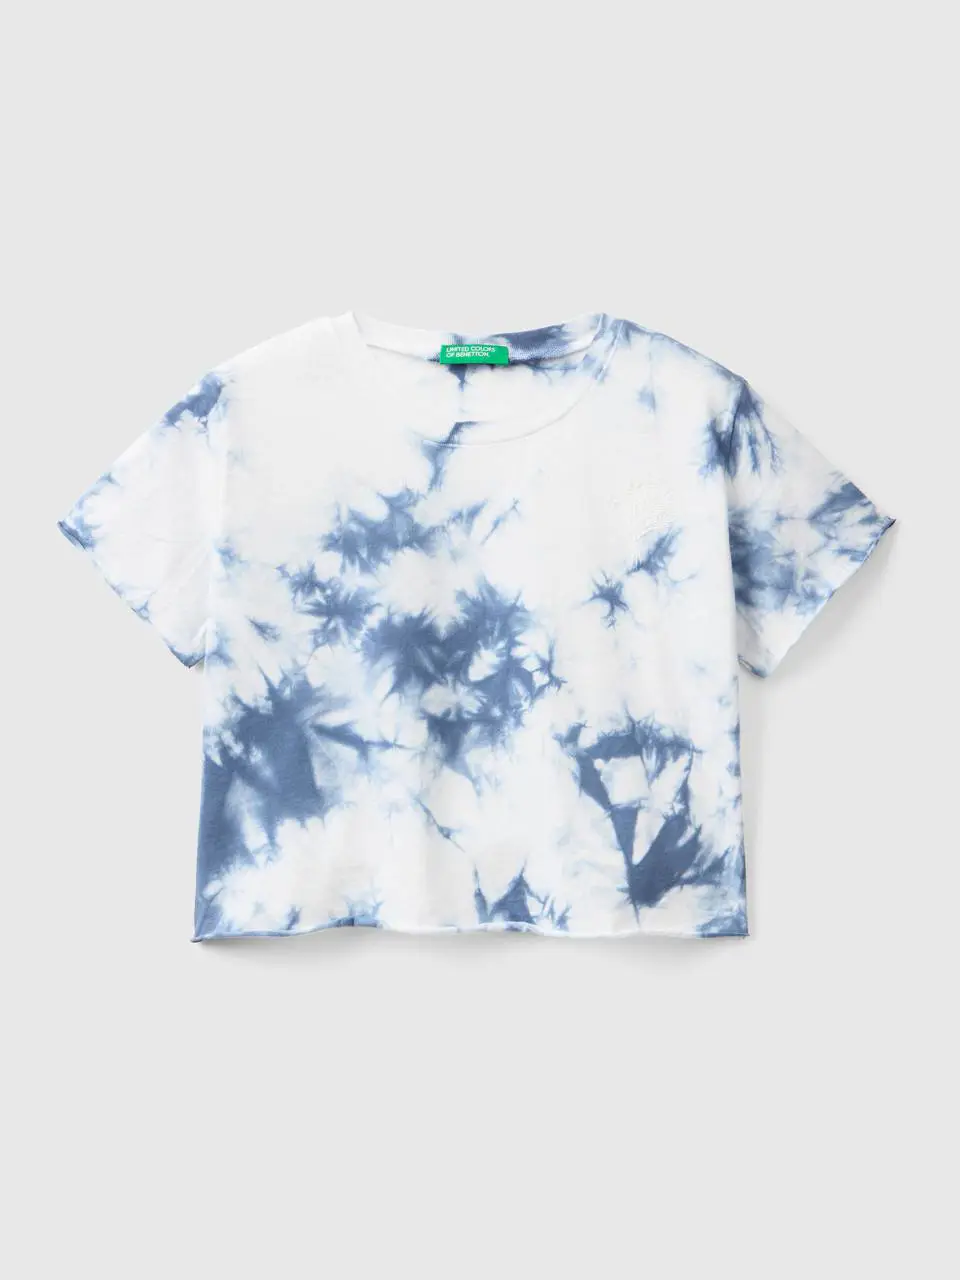 Benetton tie-dye t-shirt with embroidery. 1